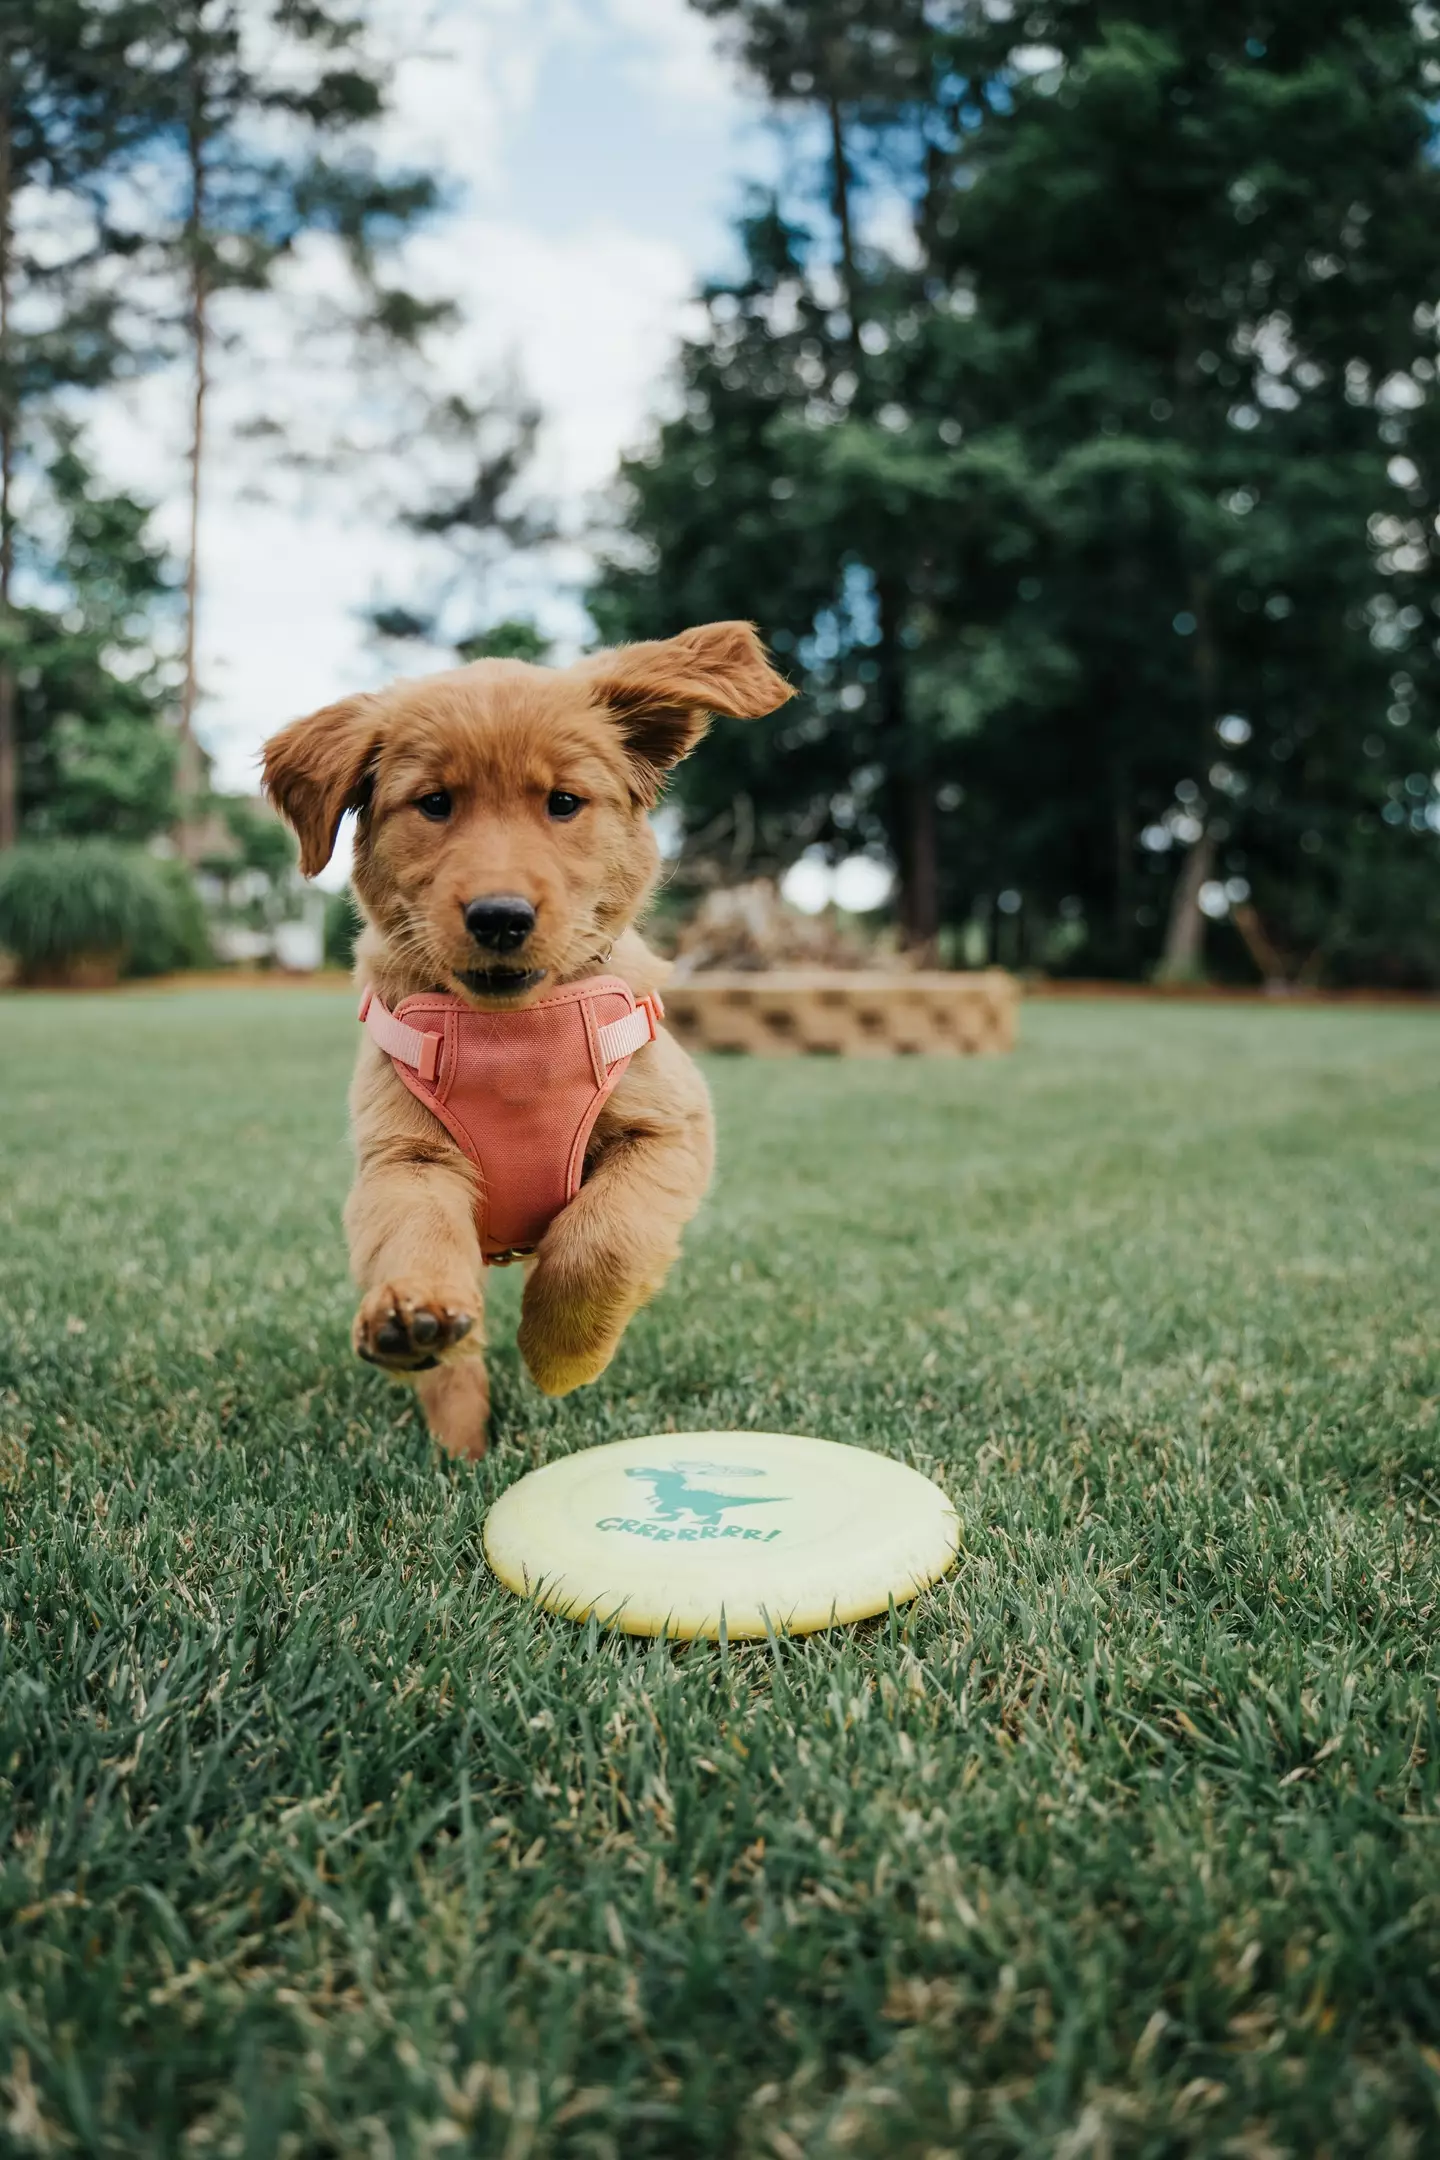 "Remember, if it’s going in the dog's mouth, it’s gonna be covered in saliva so you’ve gotta be able to get that ball out of their mouth if anything does happen," she reminds us (Andrew Wagner Unsplash).